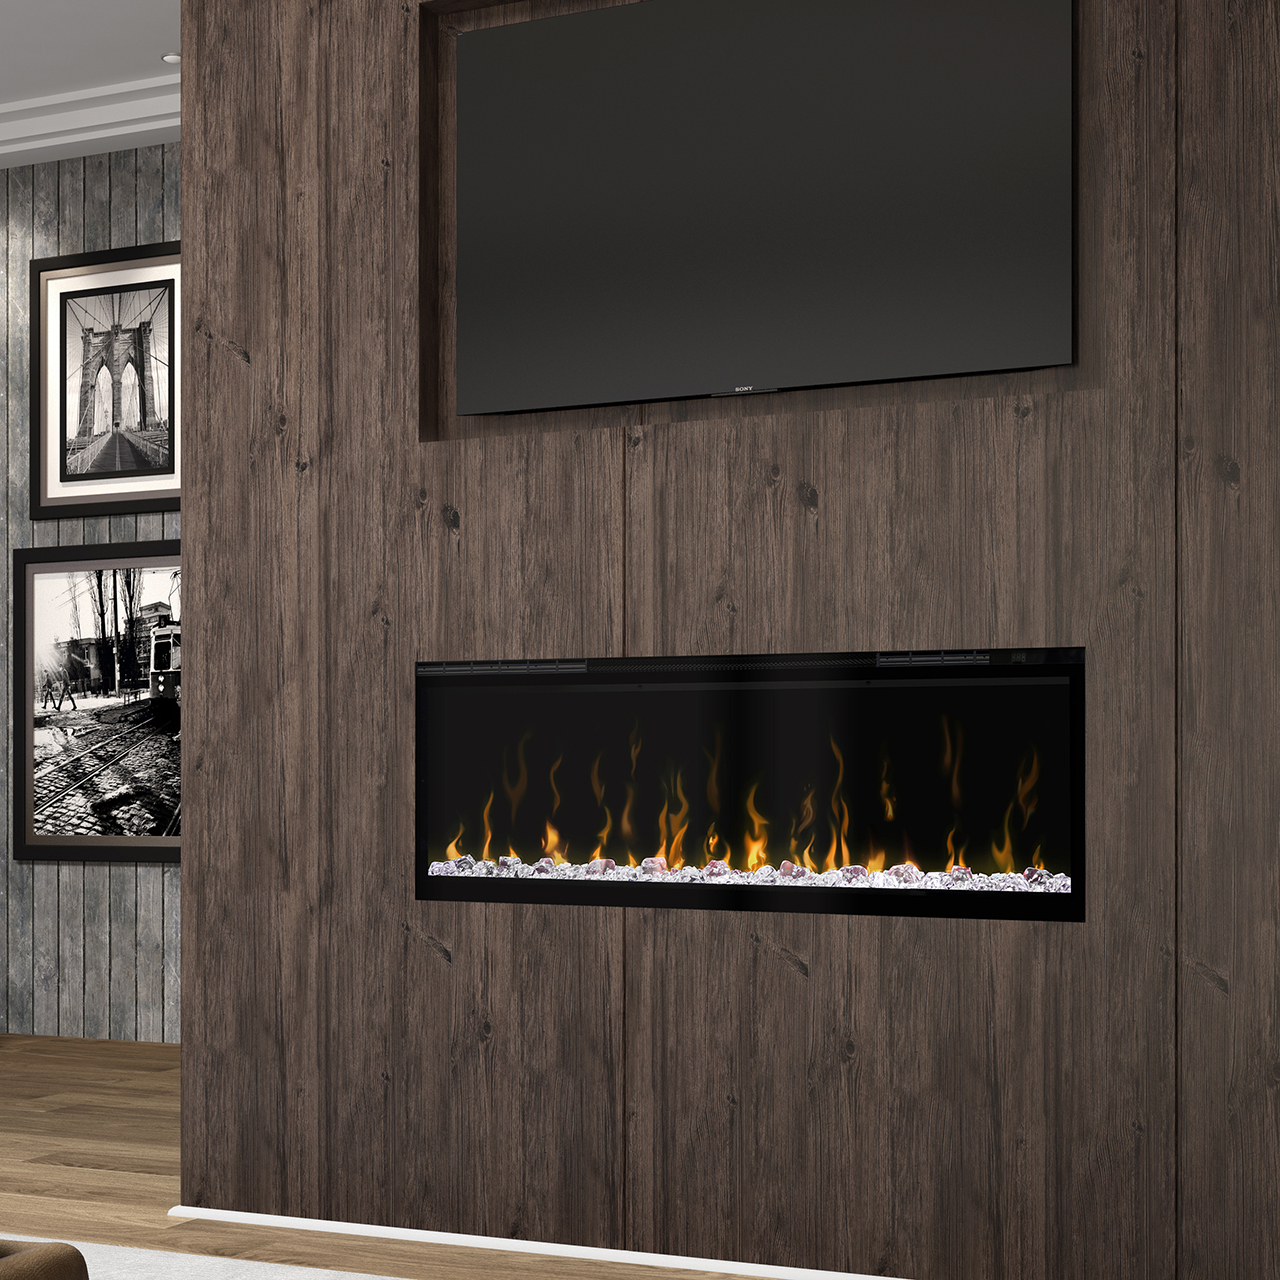 dimplex ignite xl electric fireplace installed in a brown wood media wall beneath a television